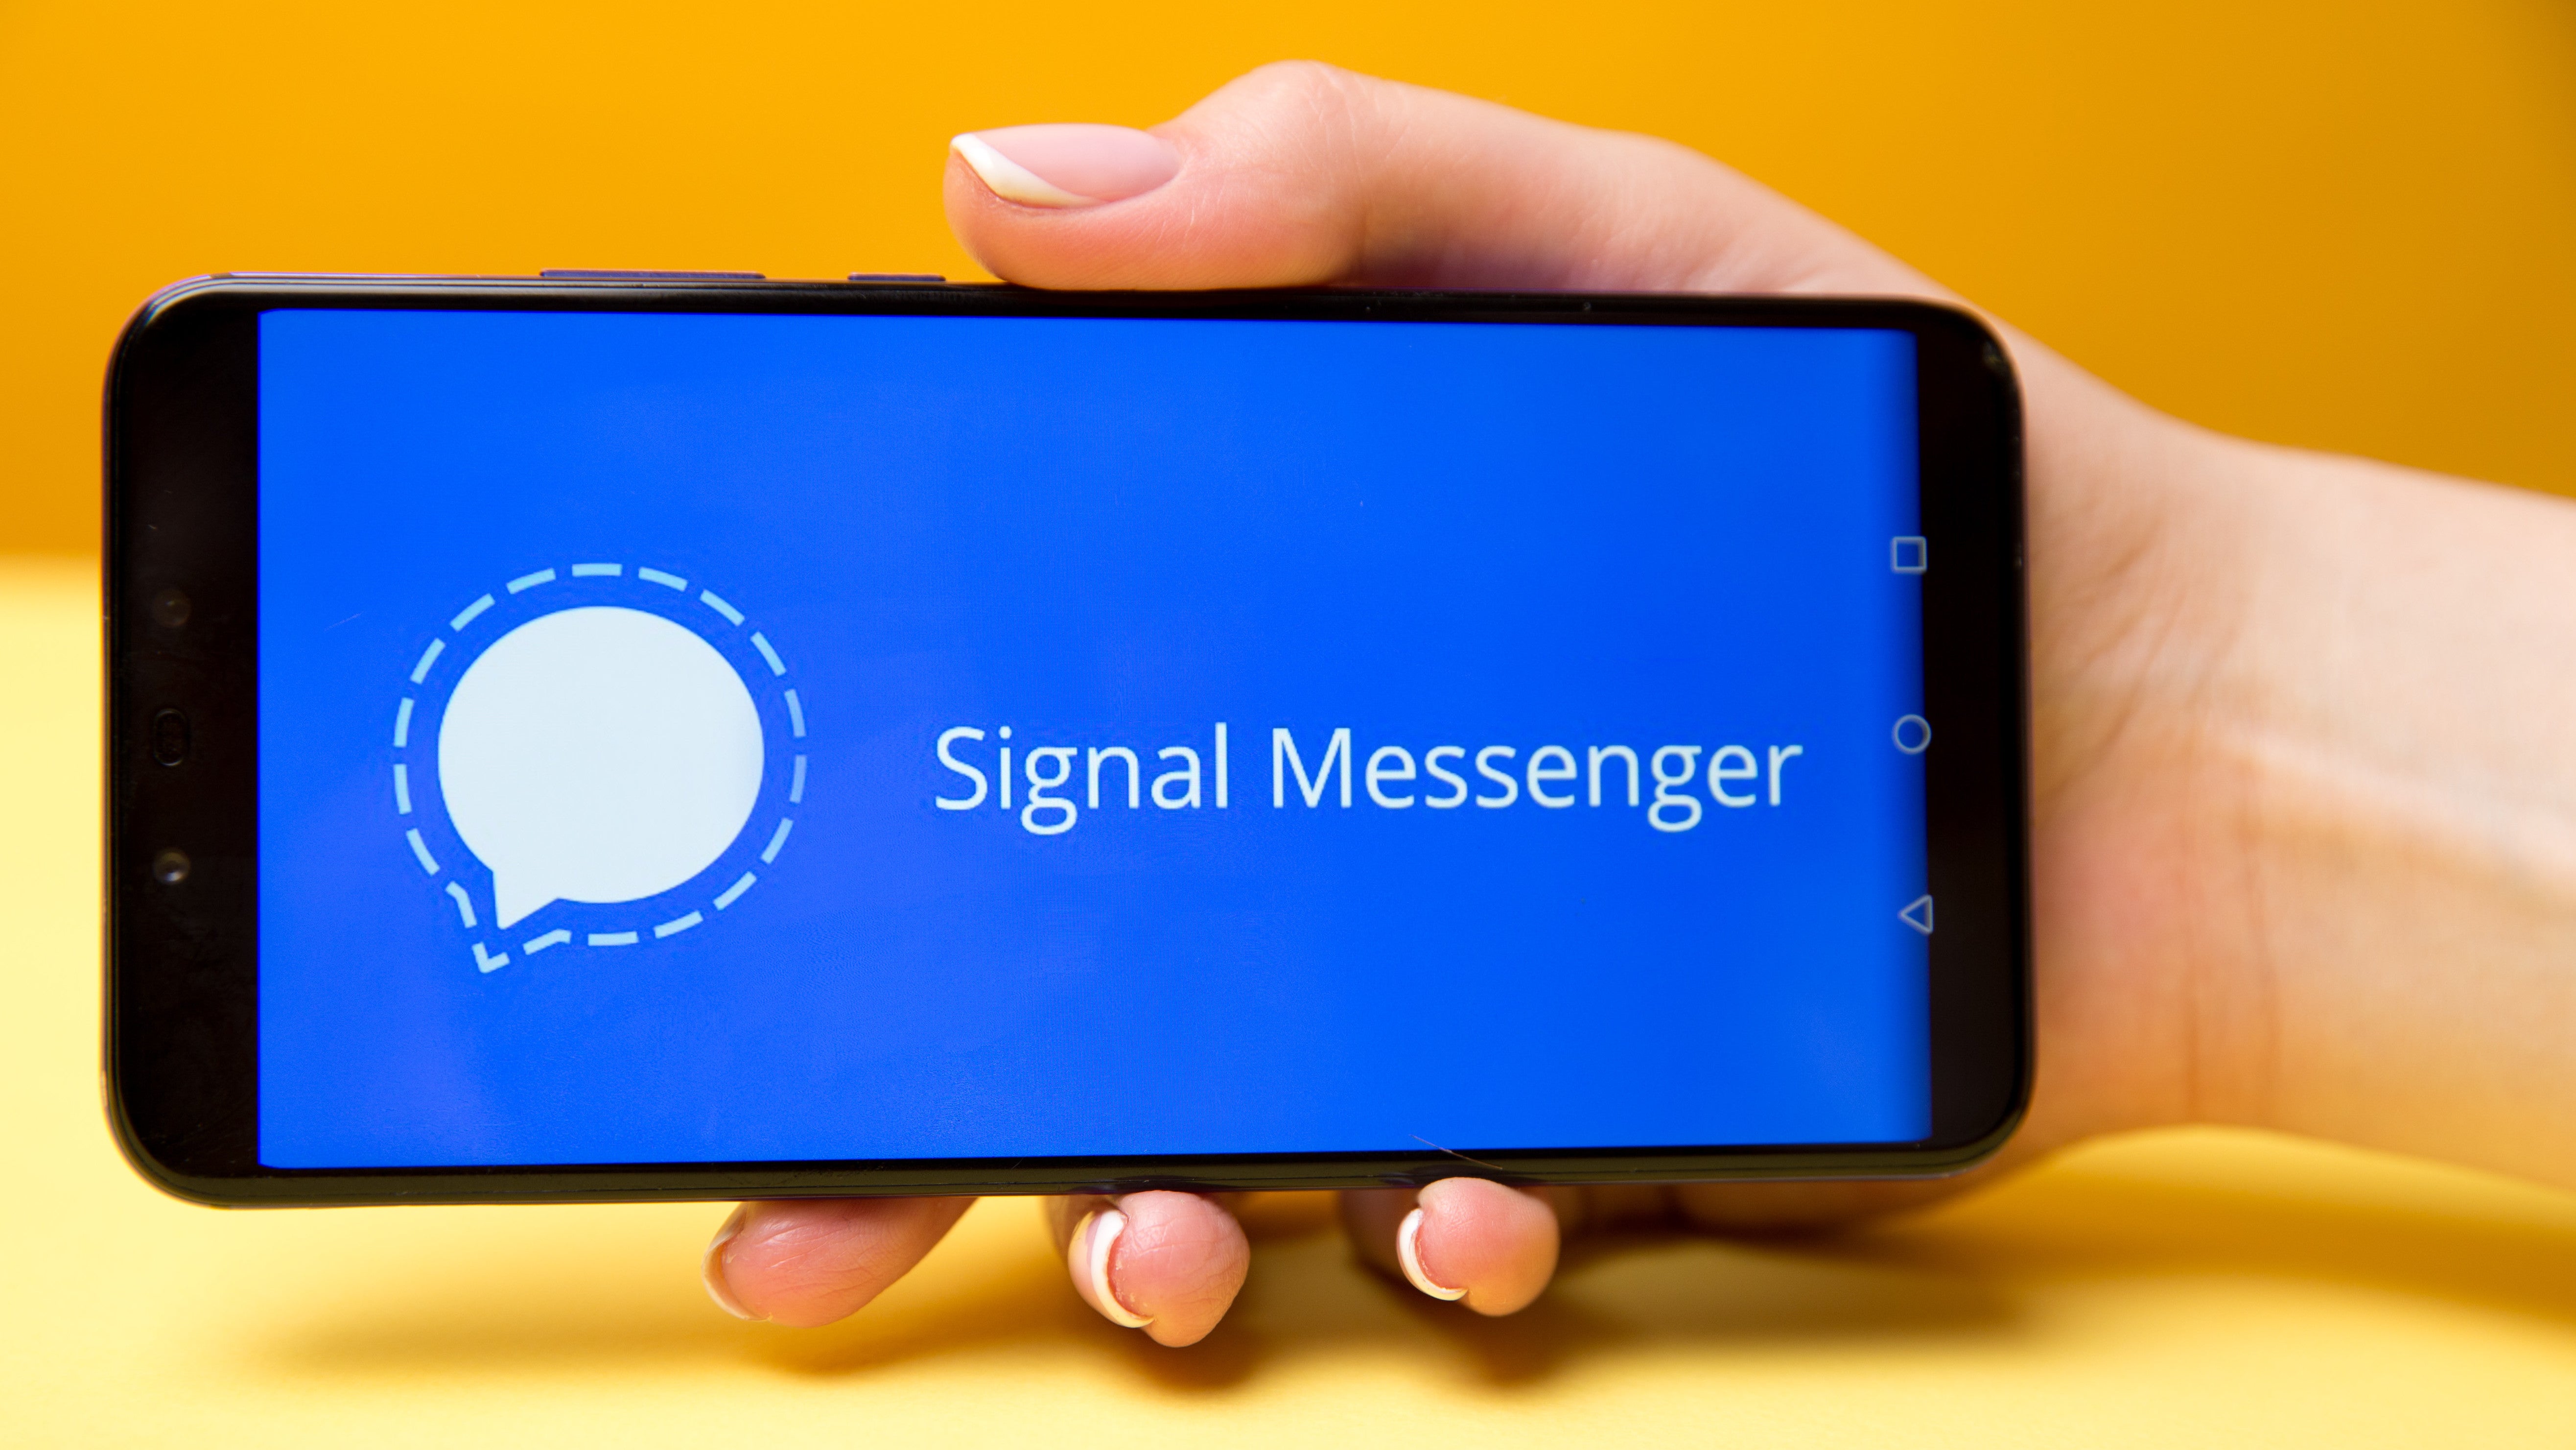 Android Users: Update Signal Now To Prevent Eavesdropping